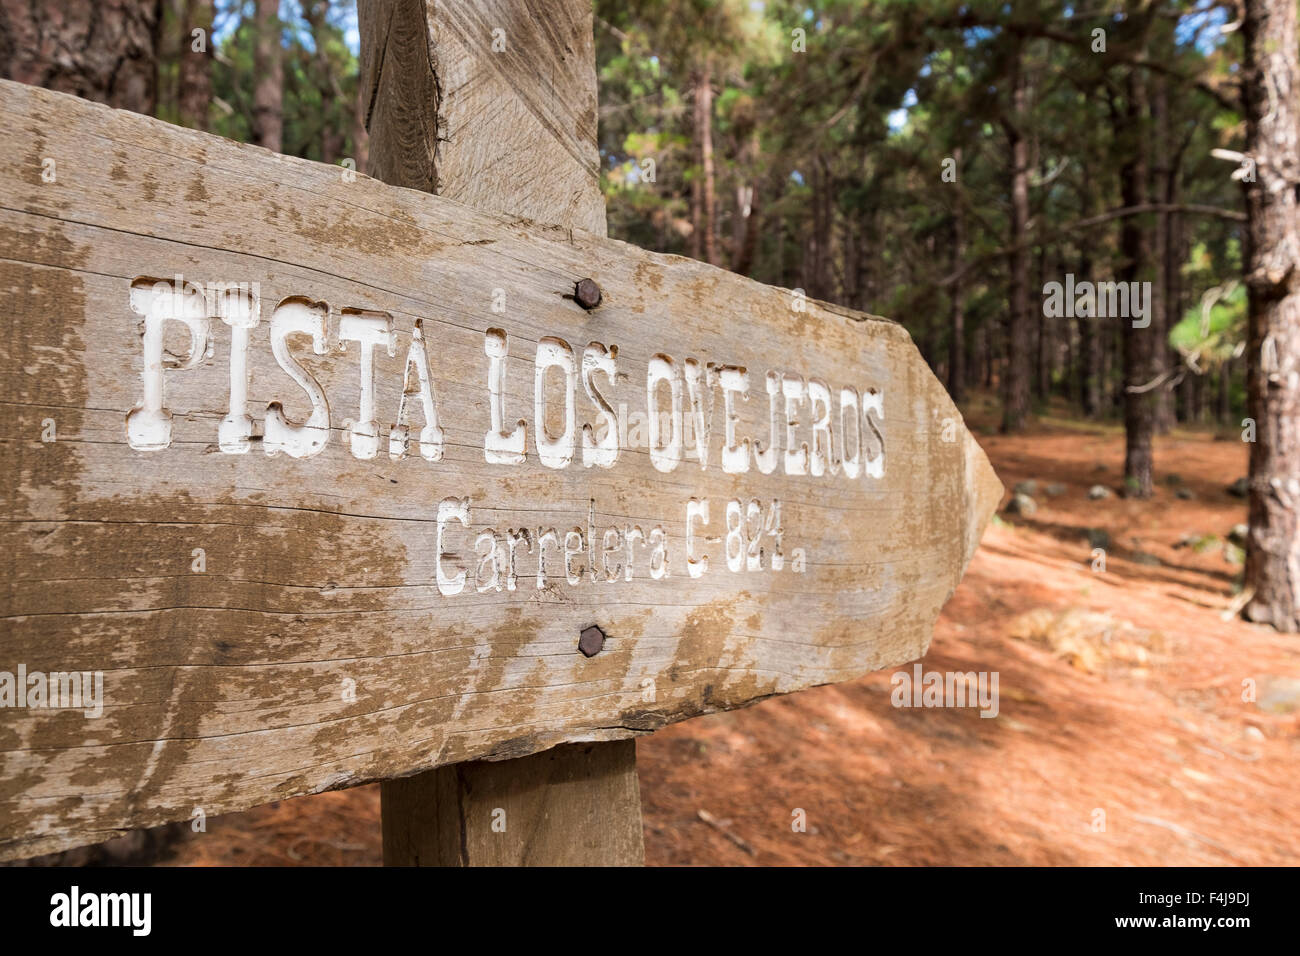 Walking route through the forest at La Esperanza, Tenerife, Canary Islands, Spain. Stock Photo